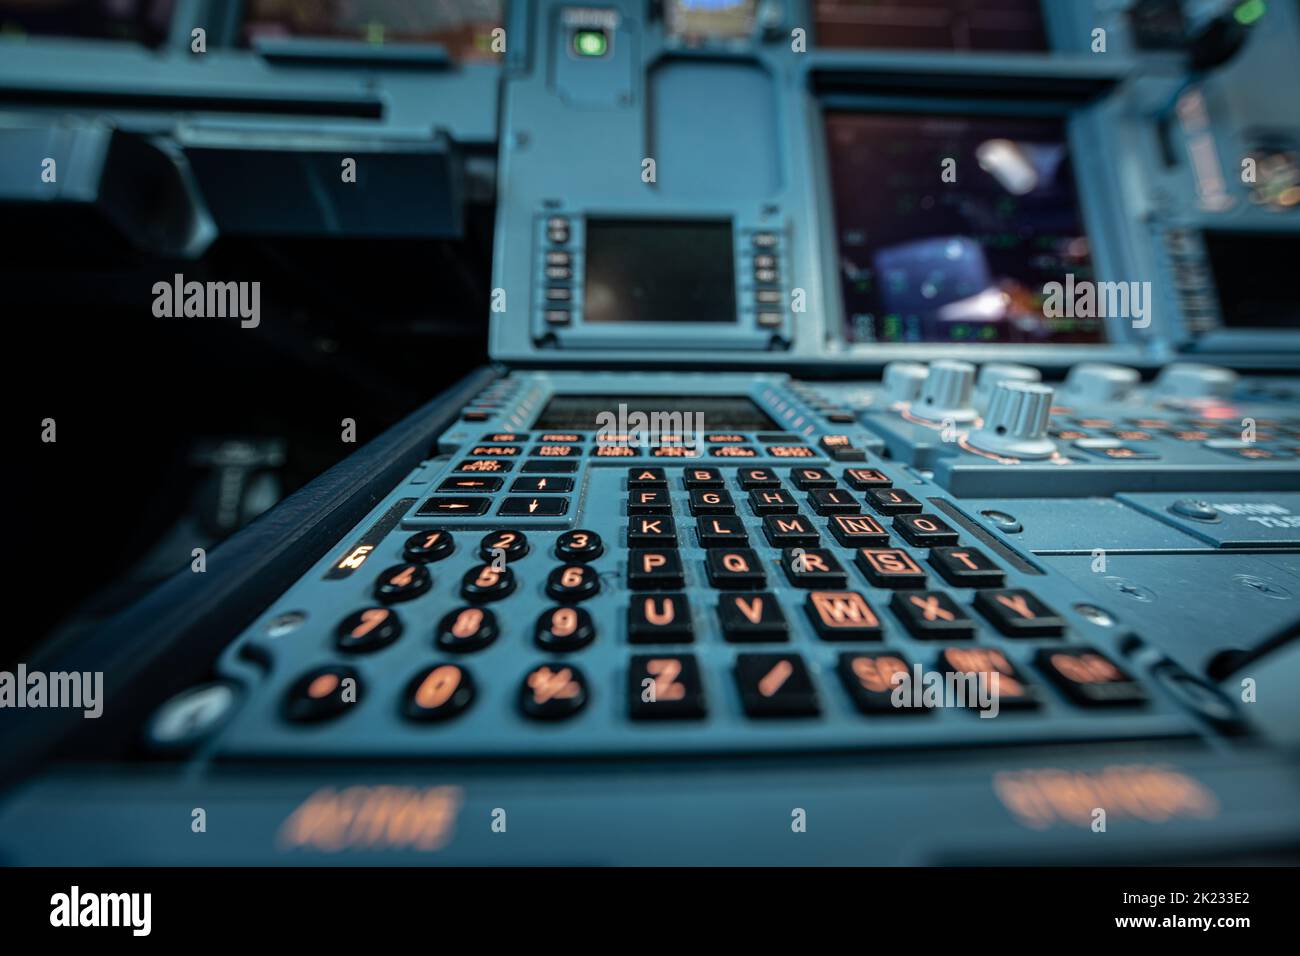 Airbus flight deck shot with instrument panel and view on the Flight management computer and CPDLC display.Airbus flight deck shot with instrument pan Stock Photo